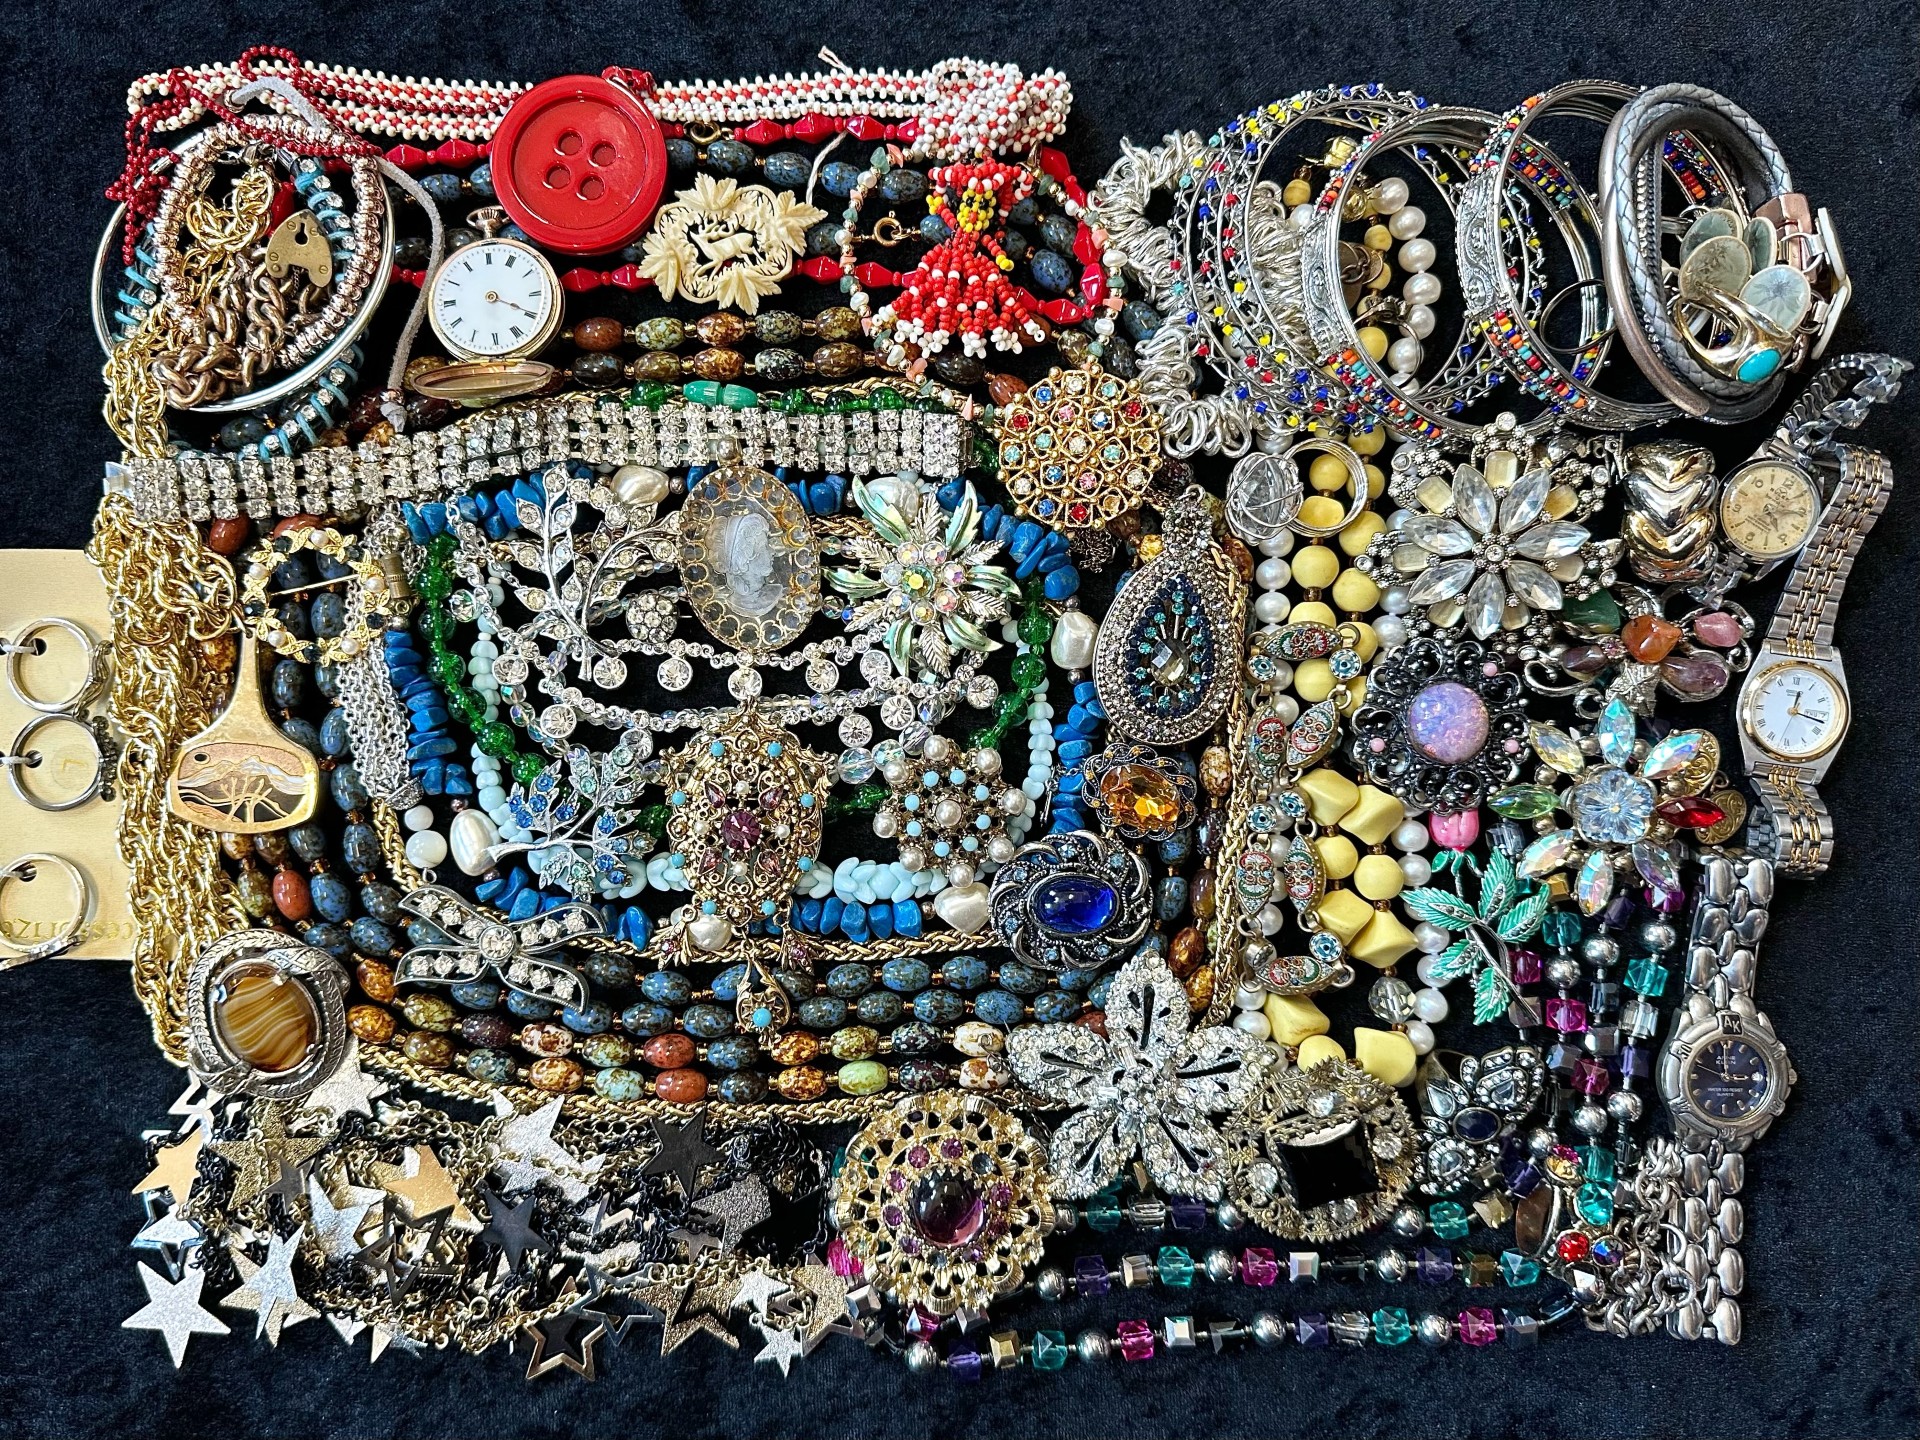 Large collection of costume jewellery. mixed lot - includes necklaces, beads, rings, Seiko watch,